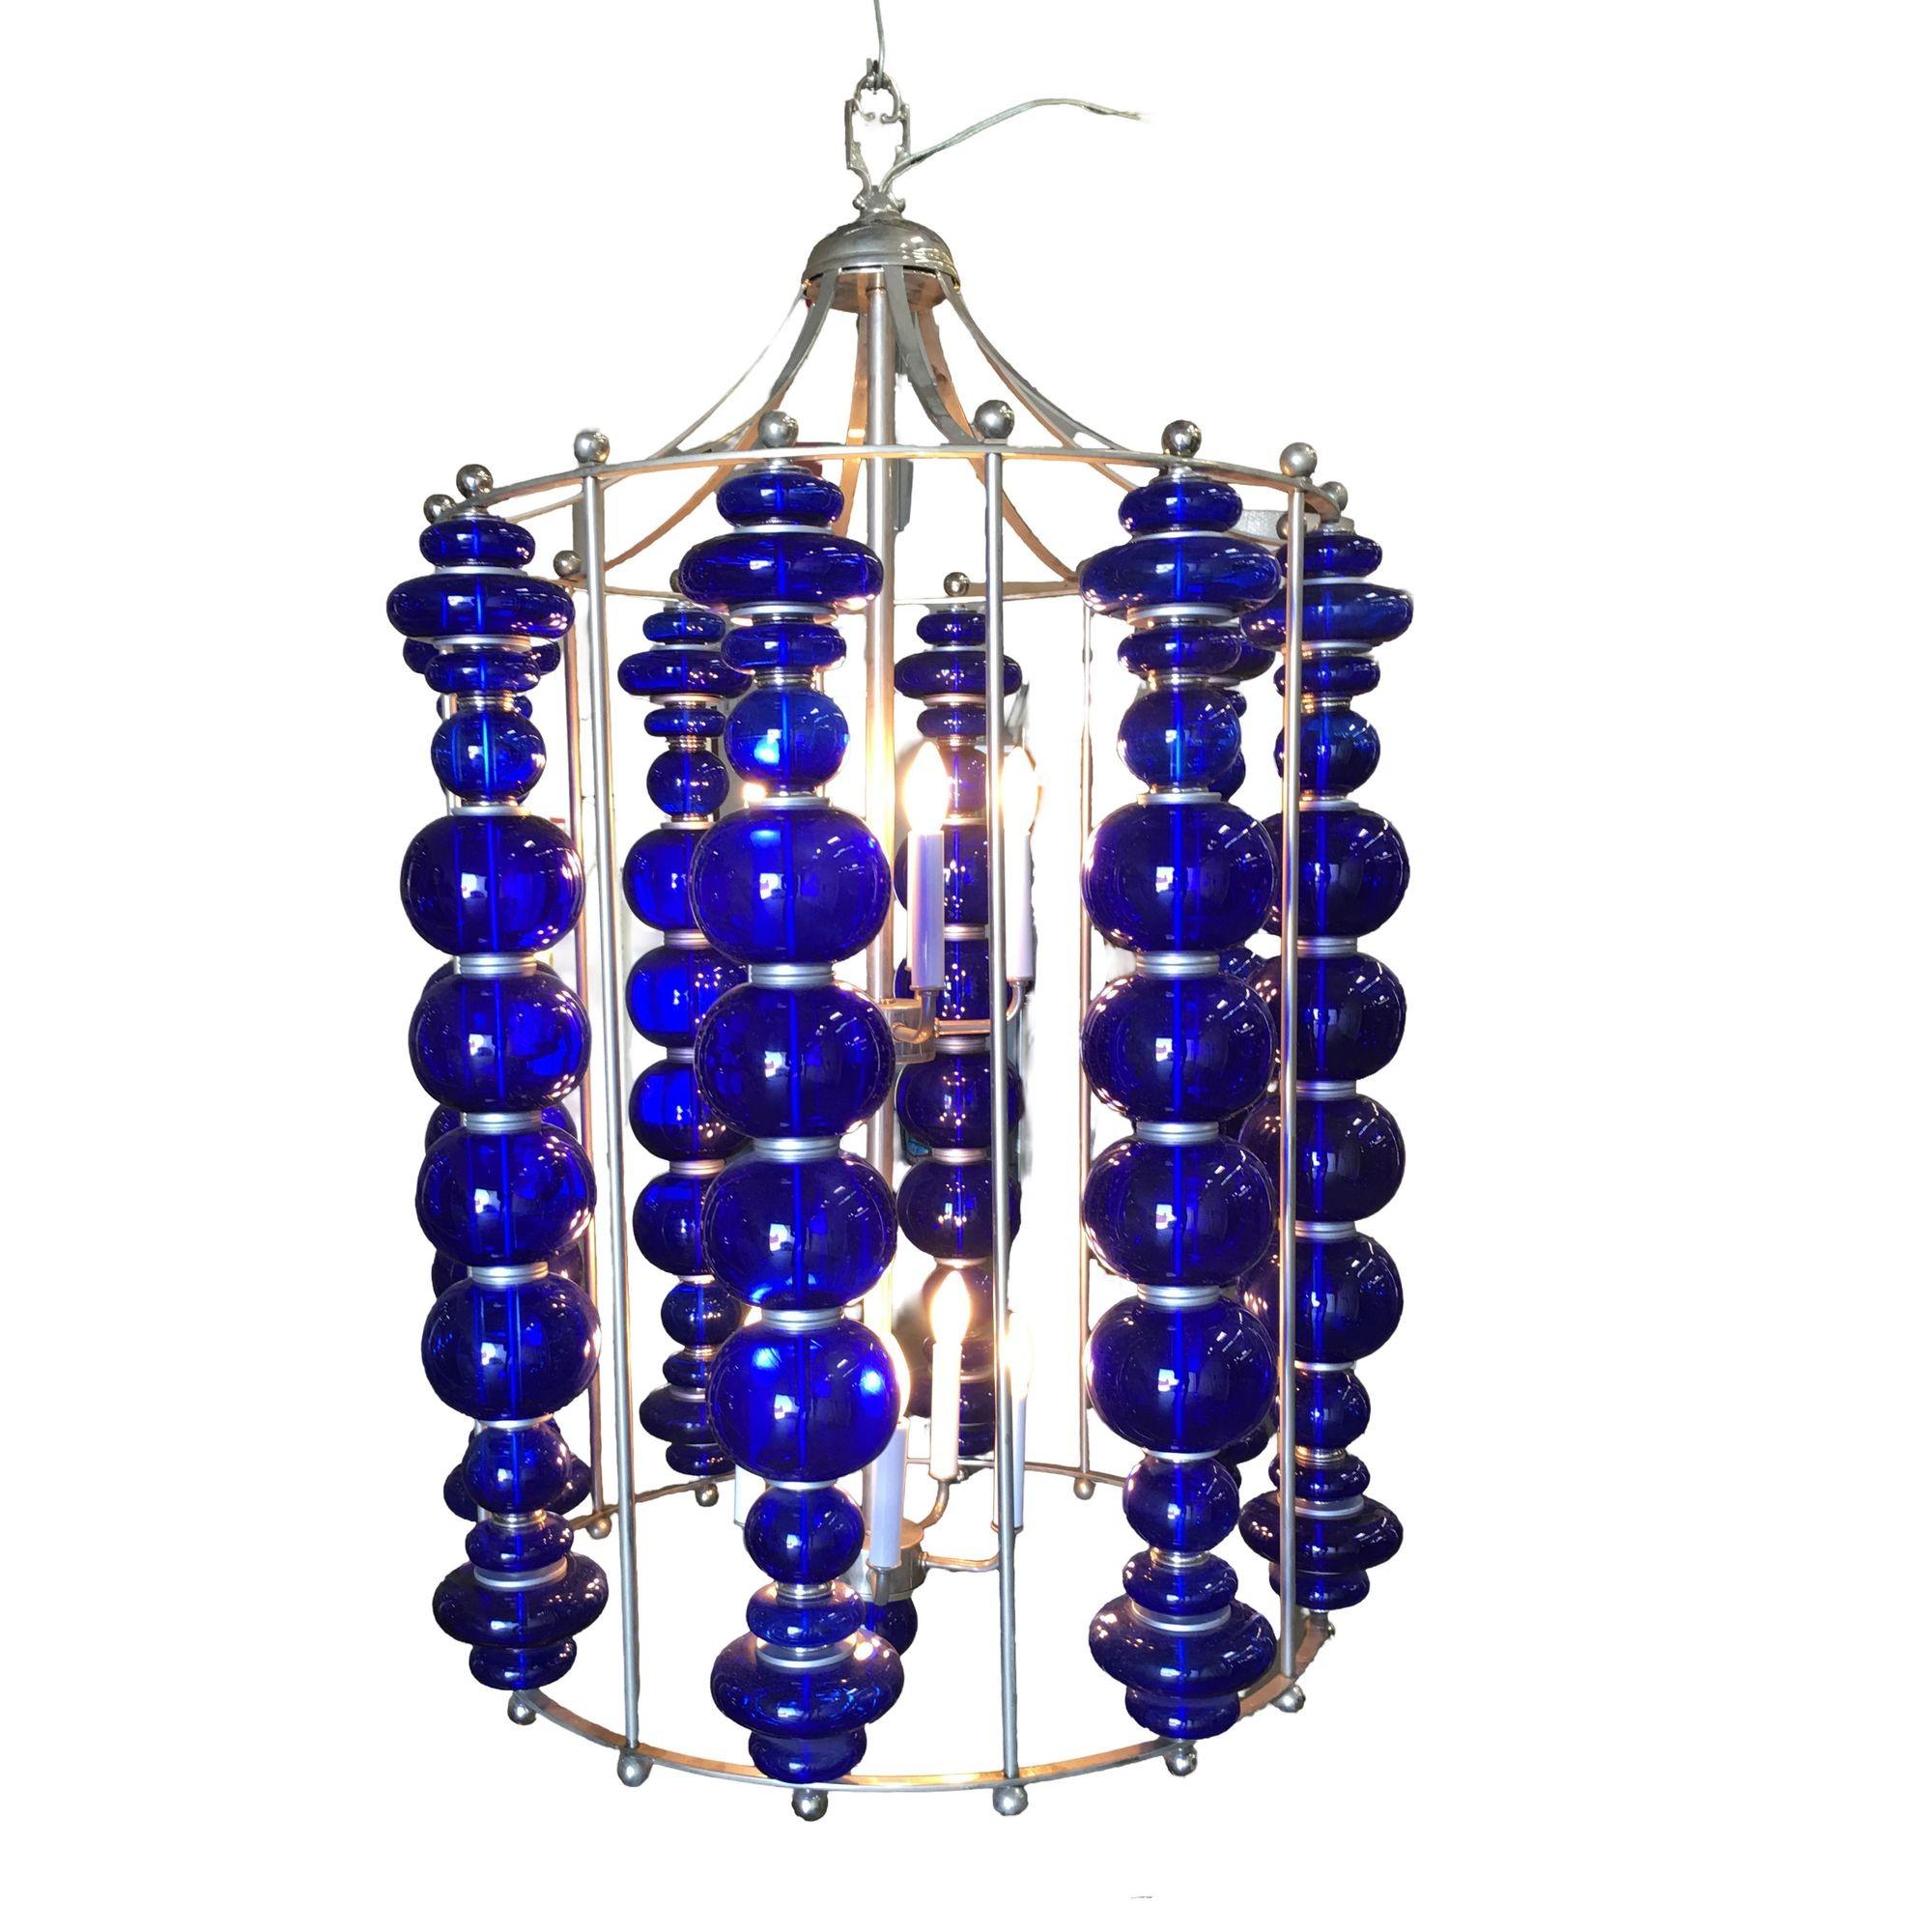 Modern stacked cobalt glass Chandelier featuring a round suspended nickel-plated frame with eight rows of custom-made stacked Cobalt glass.